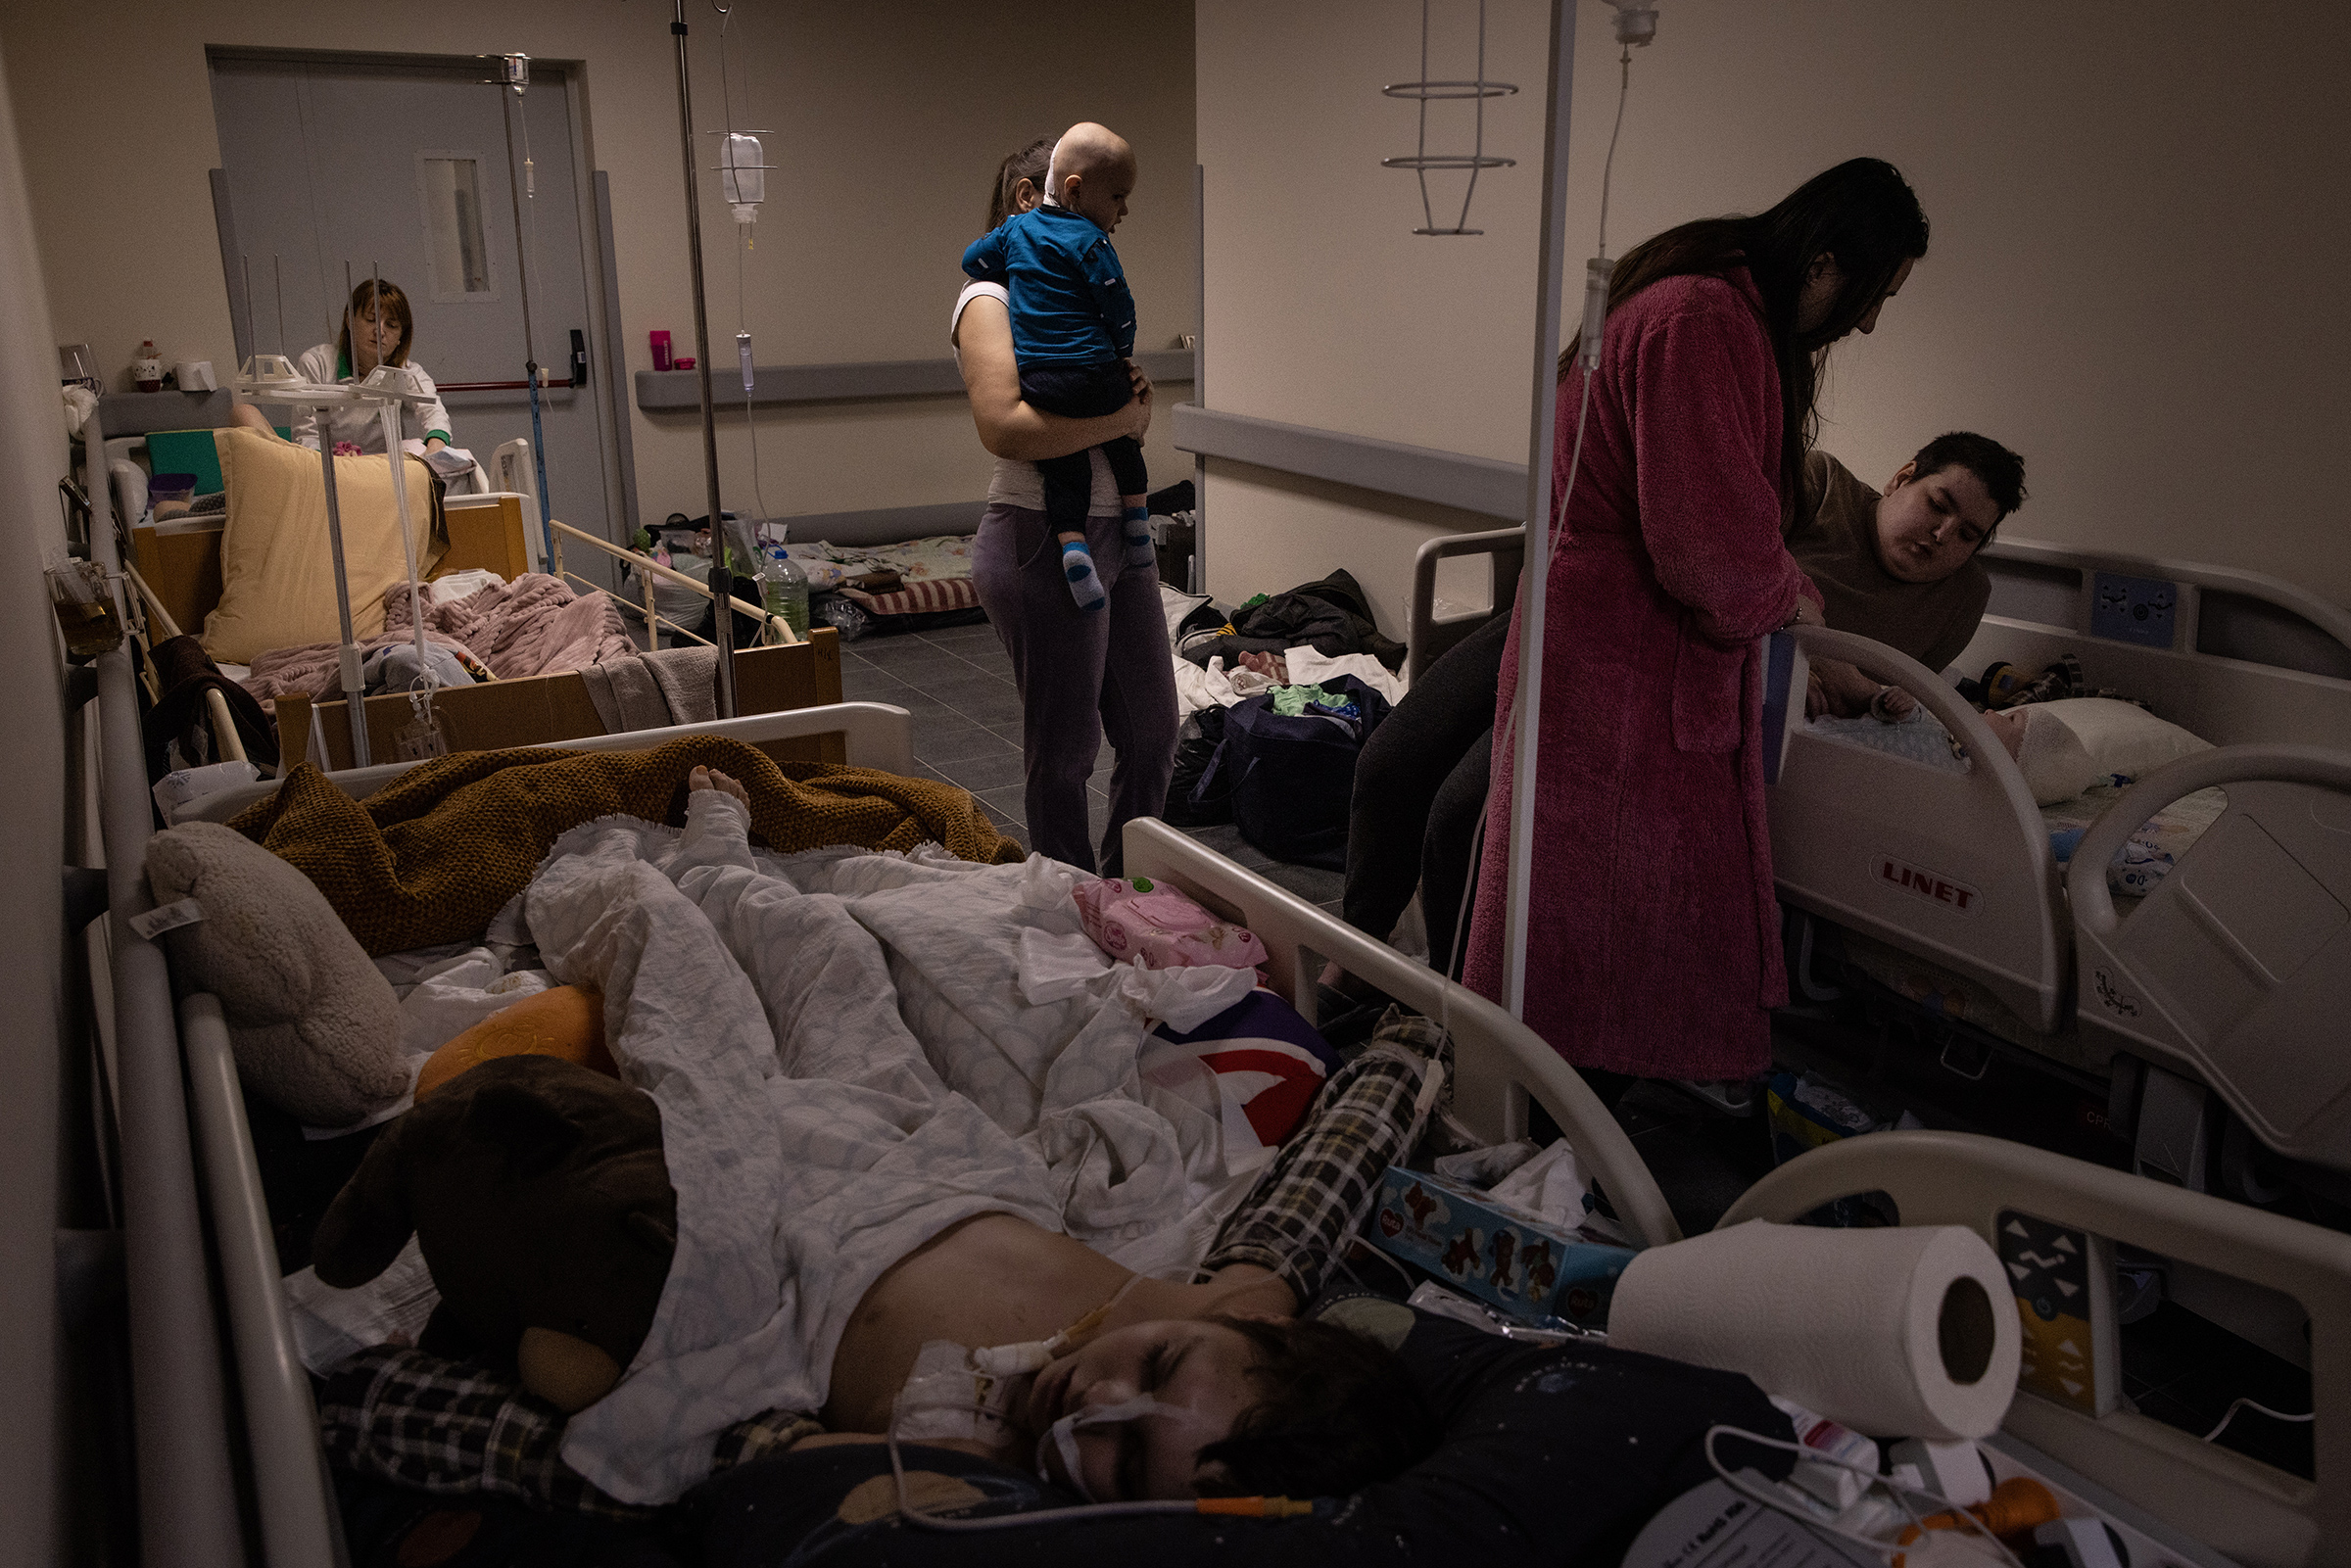 Mothers tend to their children who are undergoing cancer treatment in the bomb shelter of the Oncology ward at Okhmatdyt Children's Hospital on Feb. 28 in Kyiv (Chris McGrath—Getty Images)